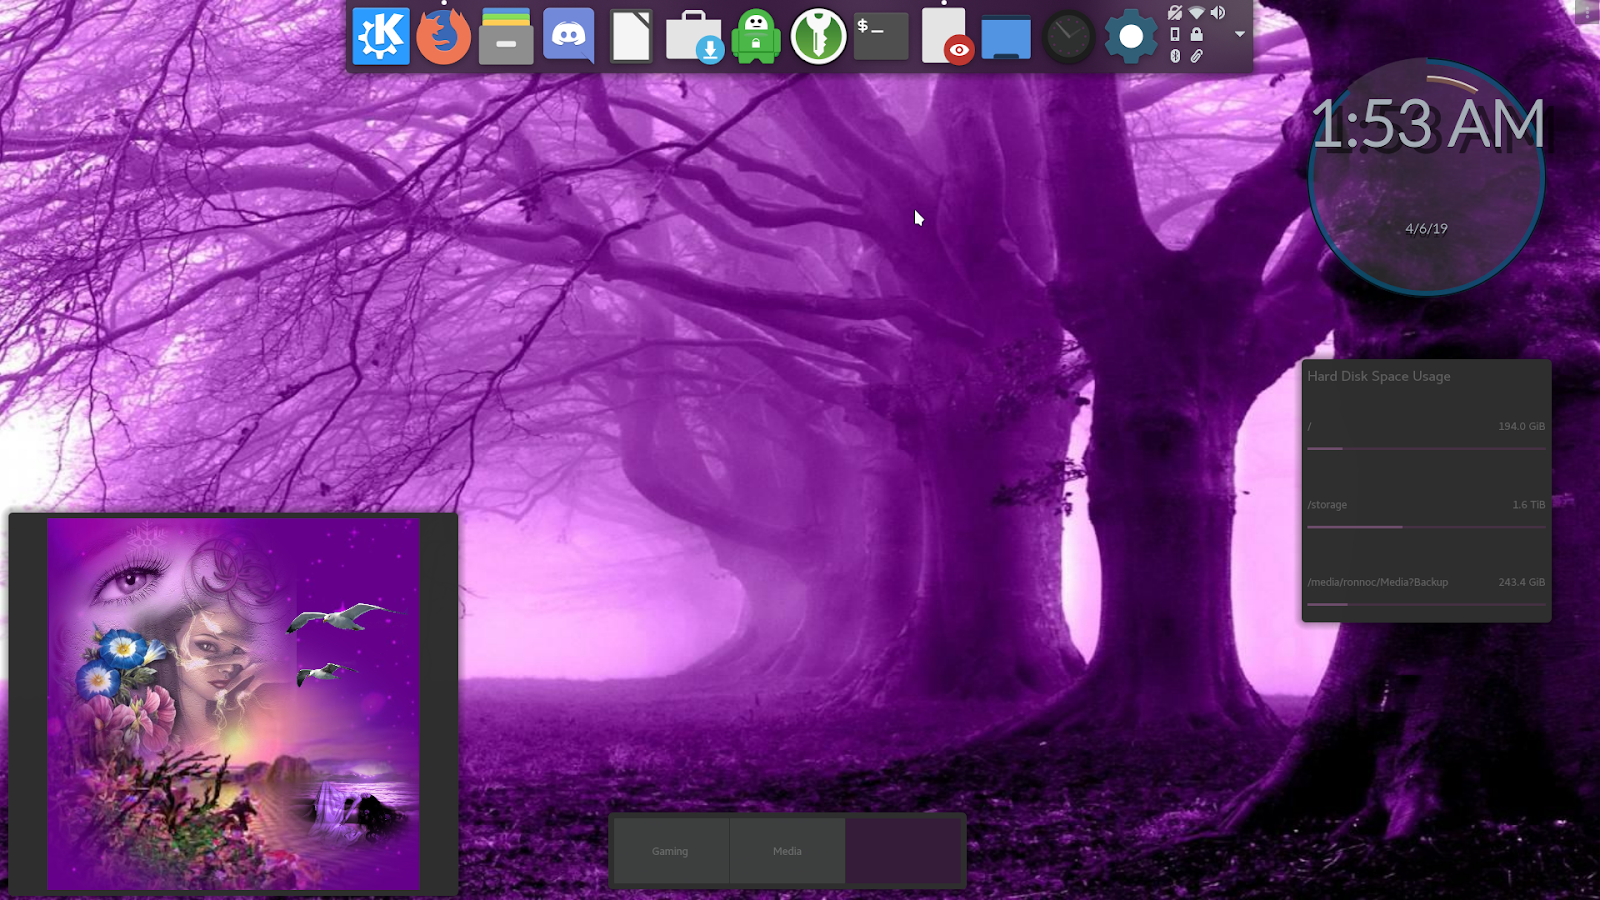 Another Purple Look With A Downloaded Wallpaper To - Purple Land - HD Wallpaper 